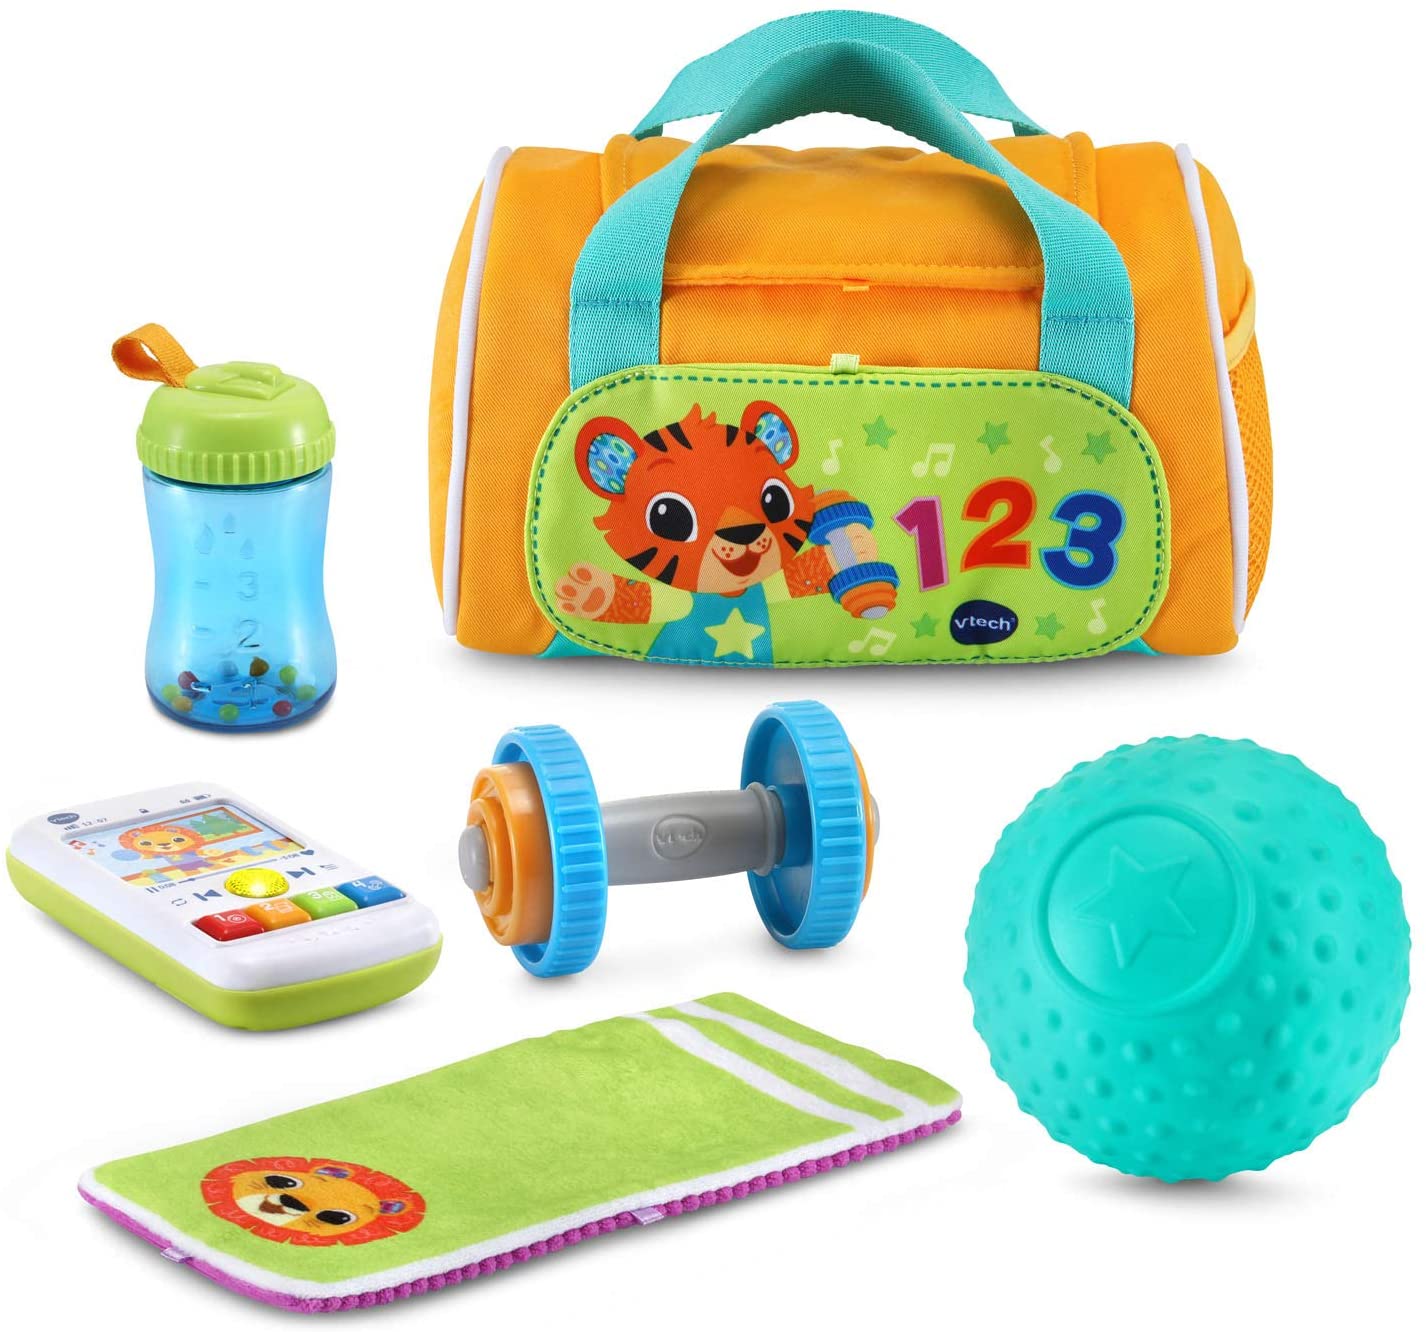 6-Piece VTech Kids' Workout Buddies Bag Pretend Exercise Playset $7.98 + Free Shipping w/ Walmart+ or on $35+